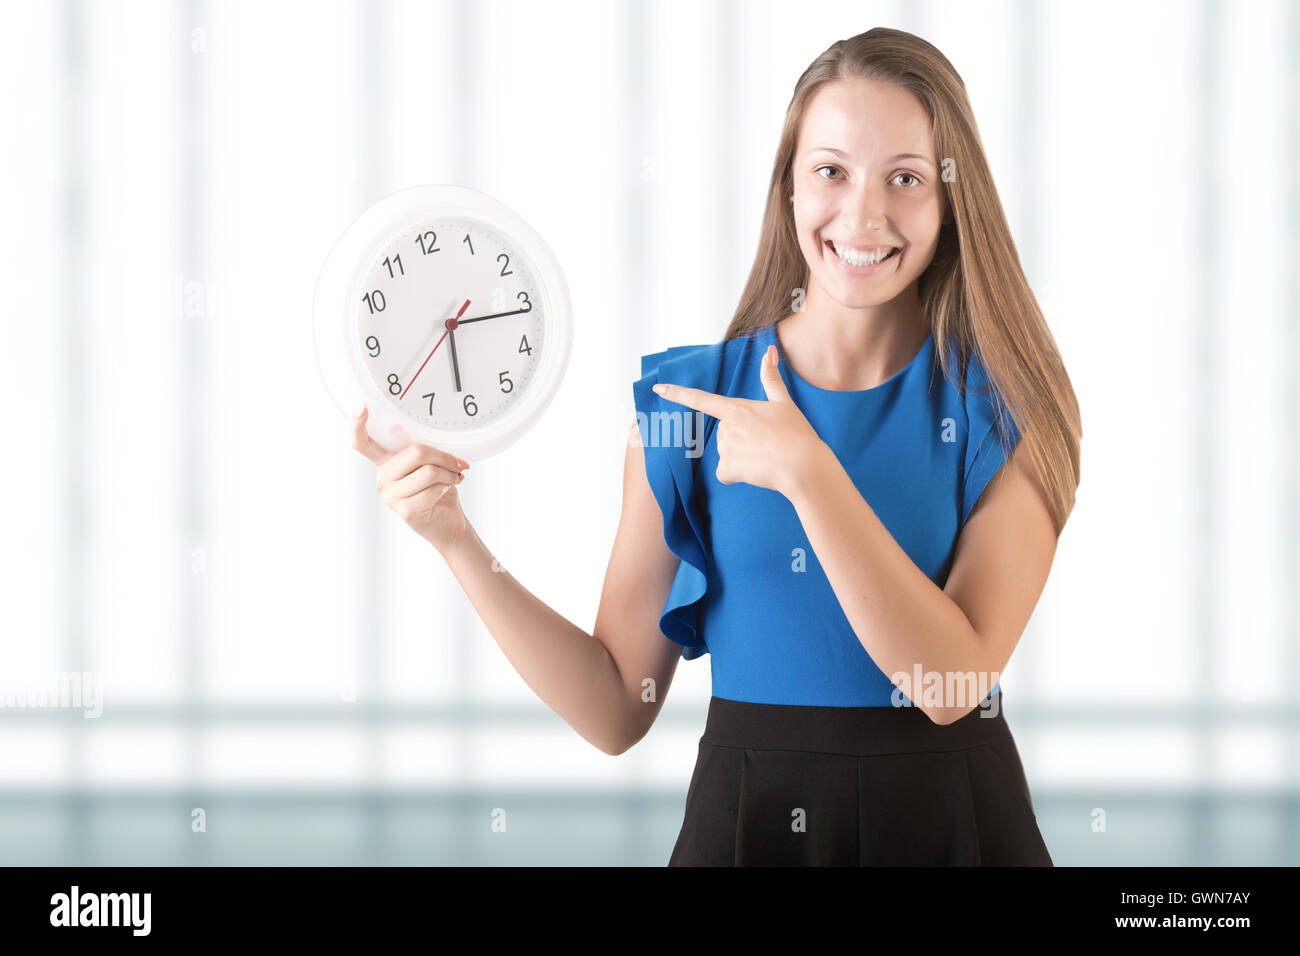 Young woman smiling and pointing at a clock. Isolated in white. Stock Photo